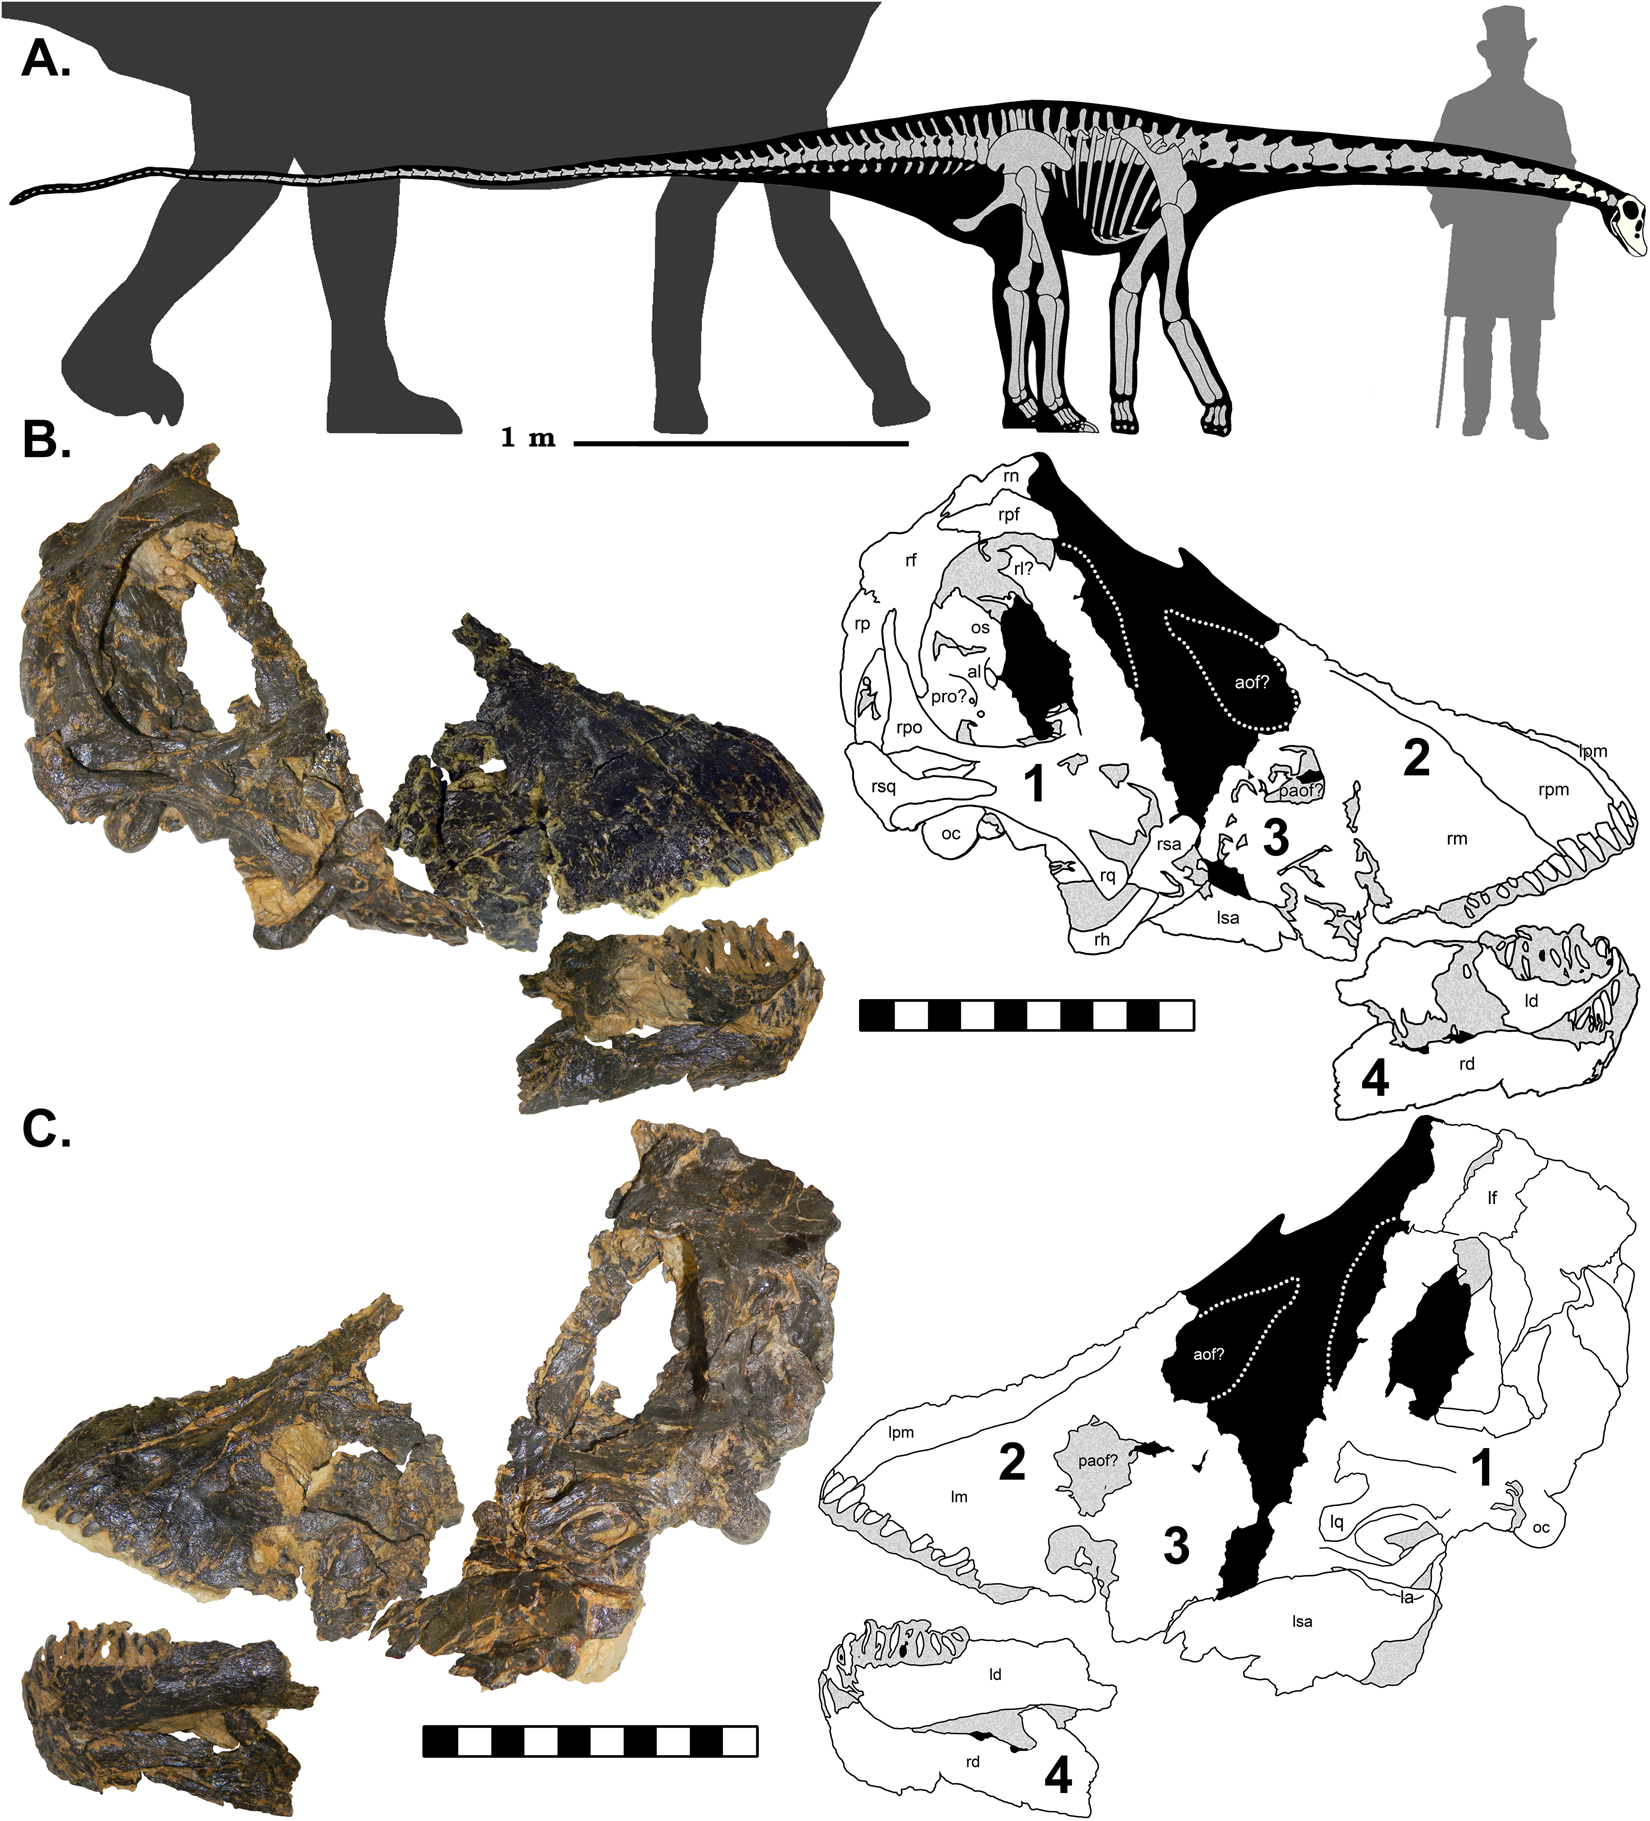 The Smallest Diplodocid Skull Reveals Cranial Ontogeny And Growth